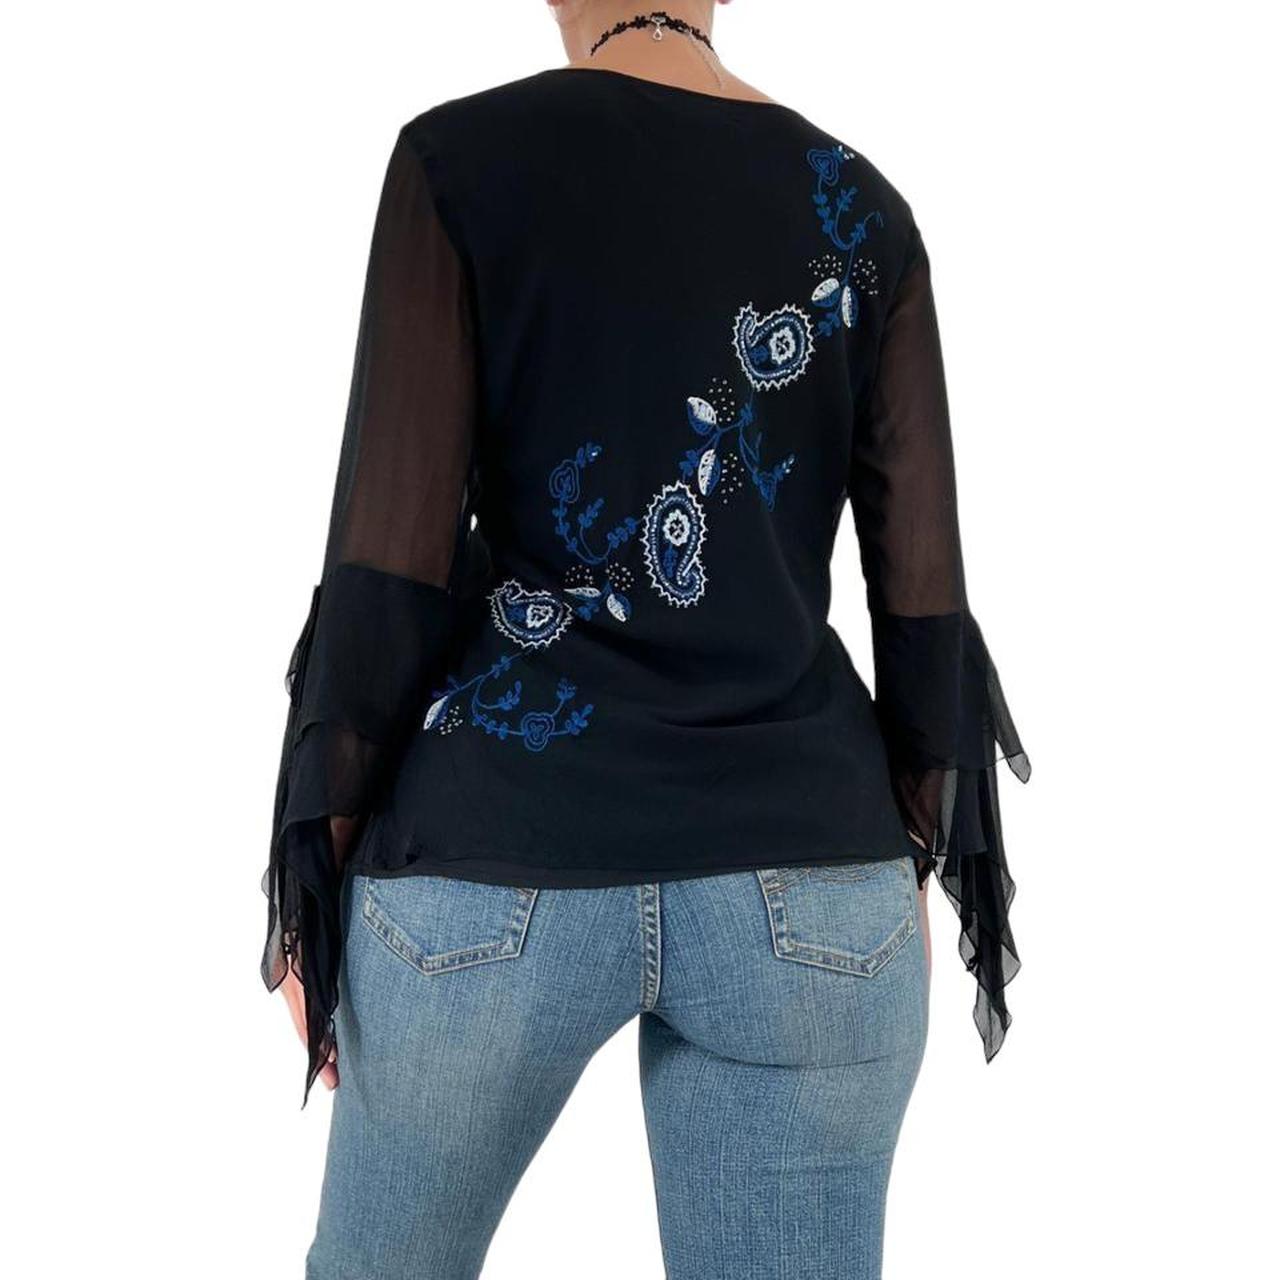 Y2k Vintage Black + Blue floral Embroidered Top w/ Sheer Butterfly Sleeves [S]